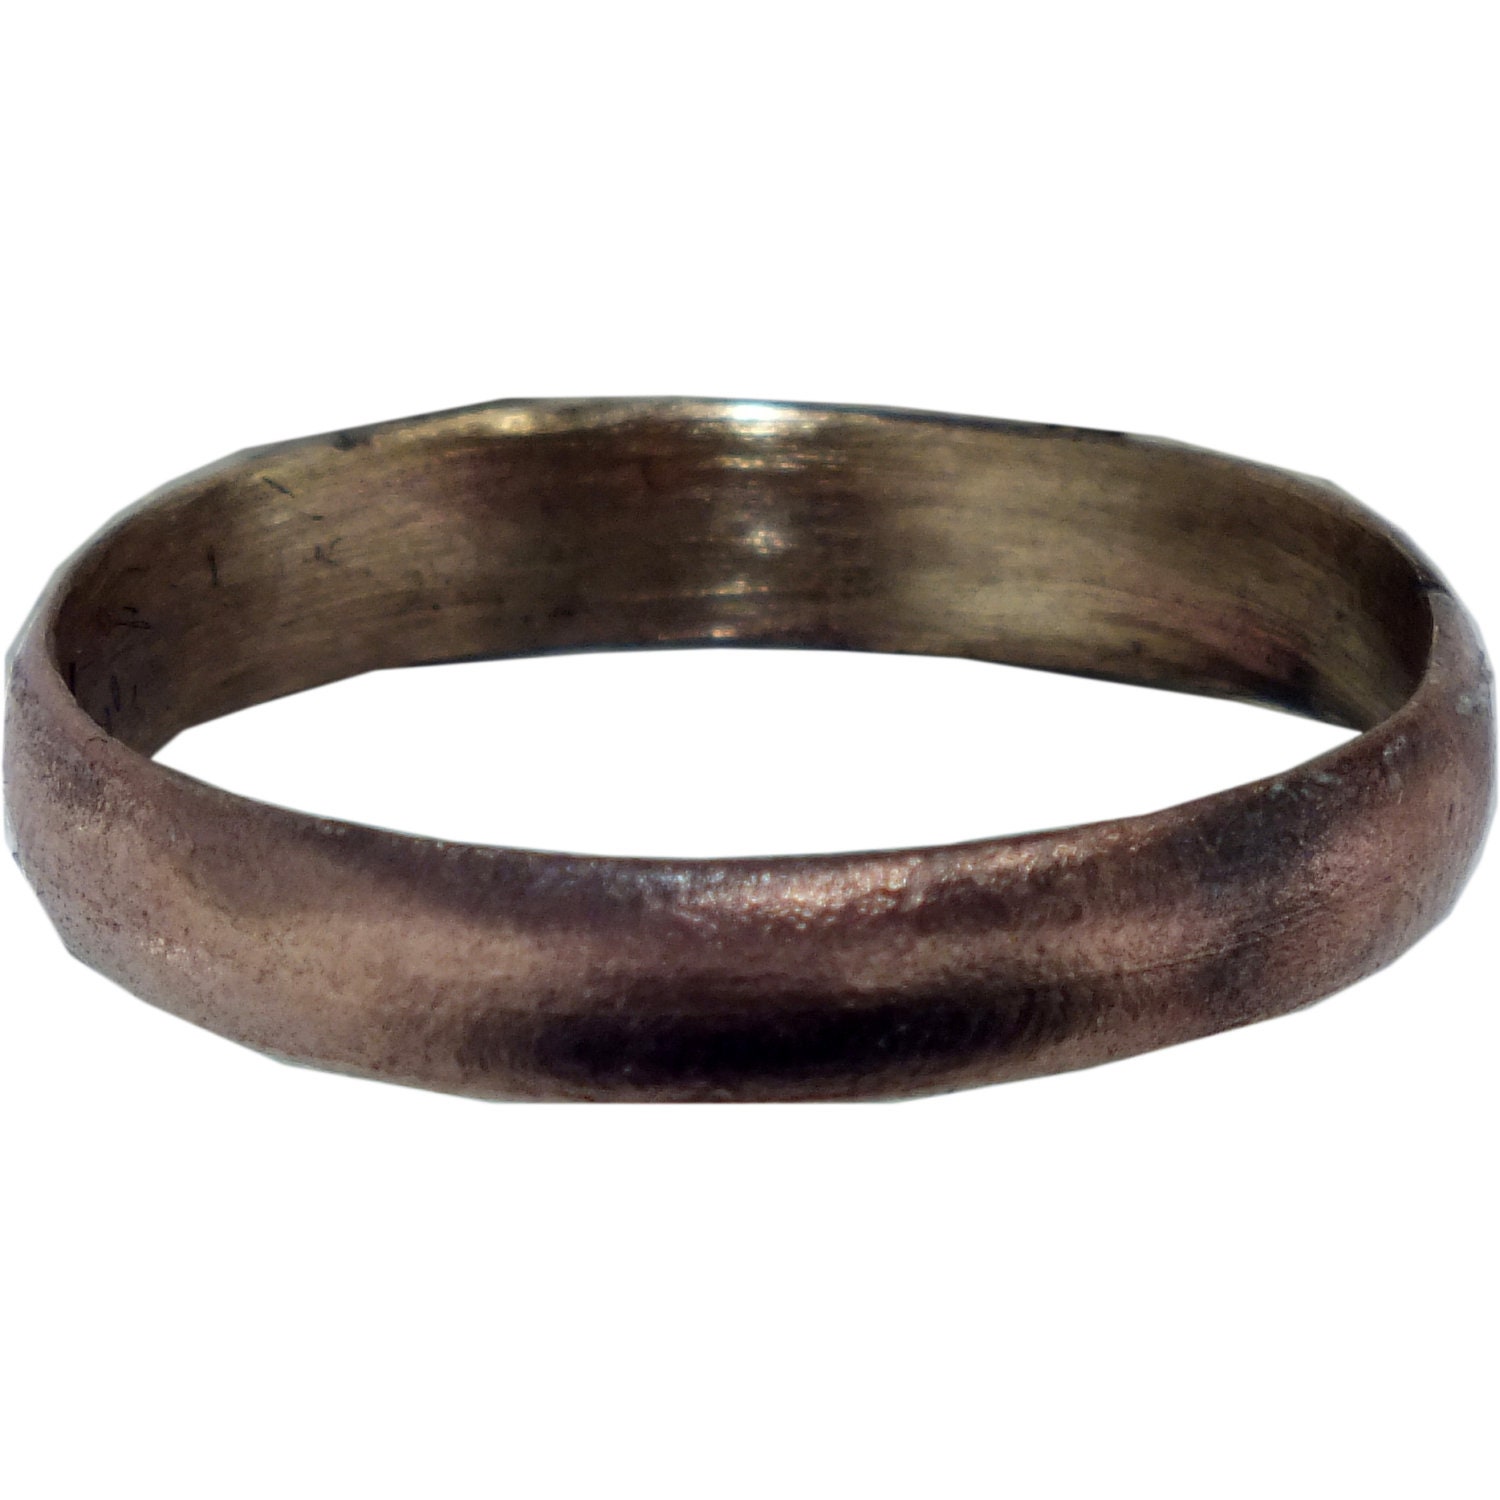 Ancient Viking Wedding Ring Mans Jewelry. Size by